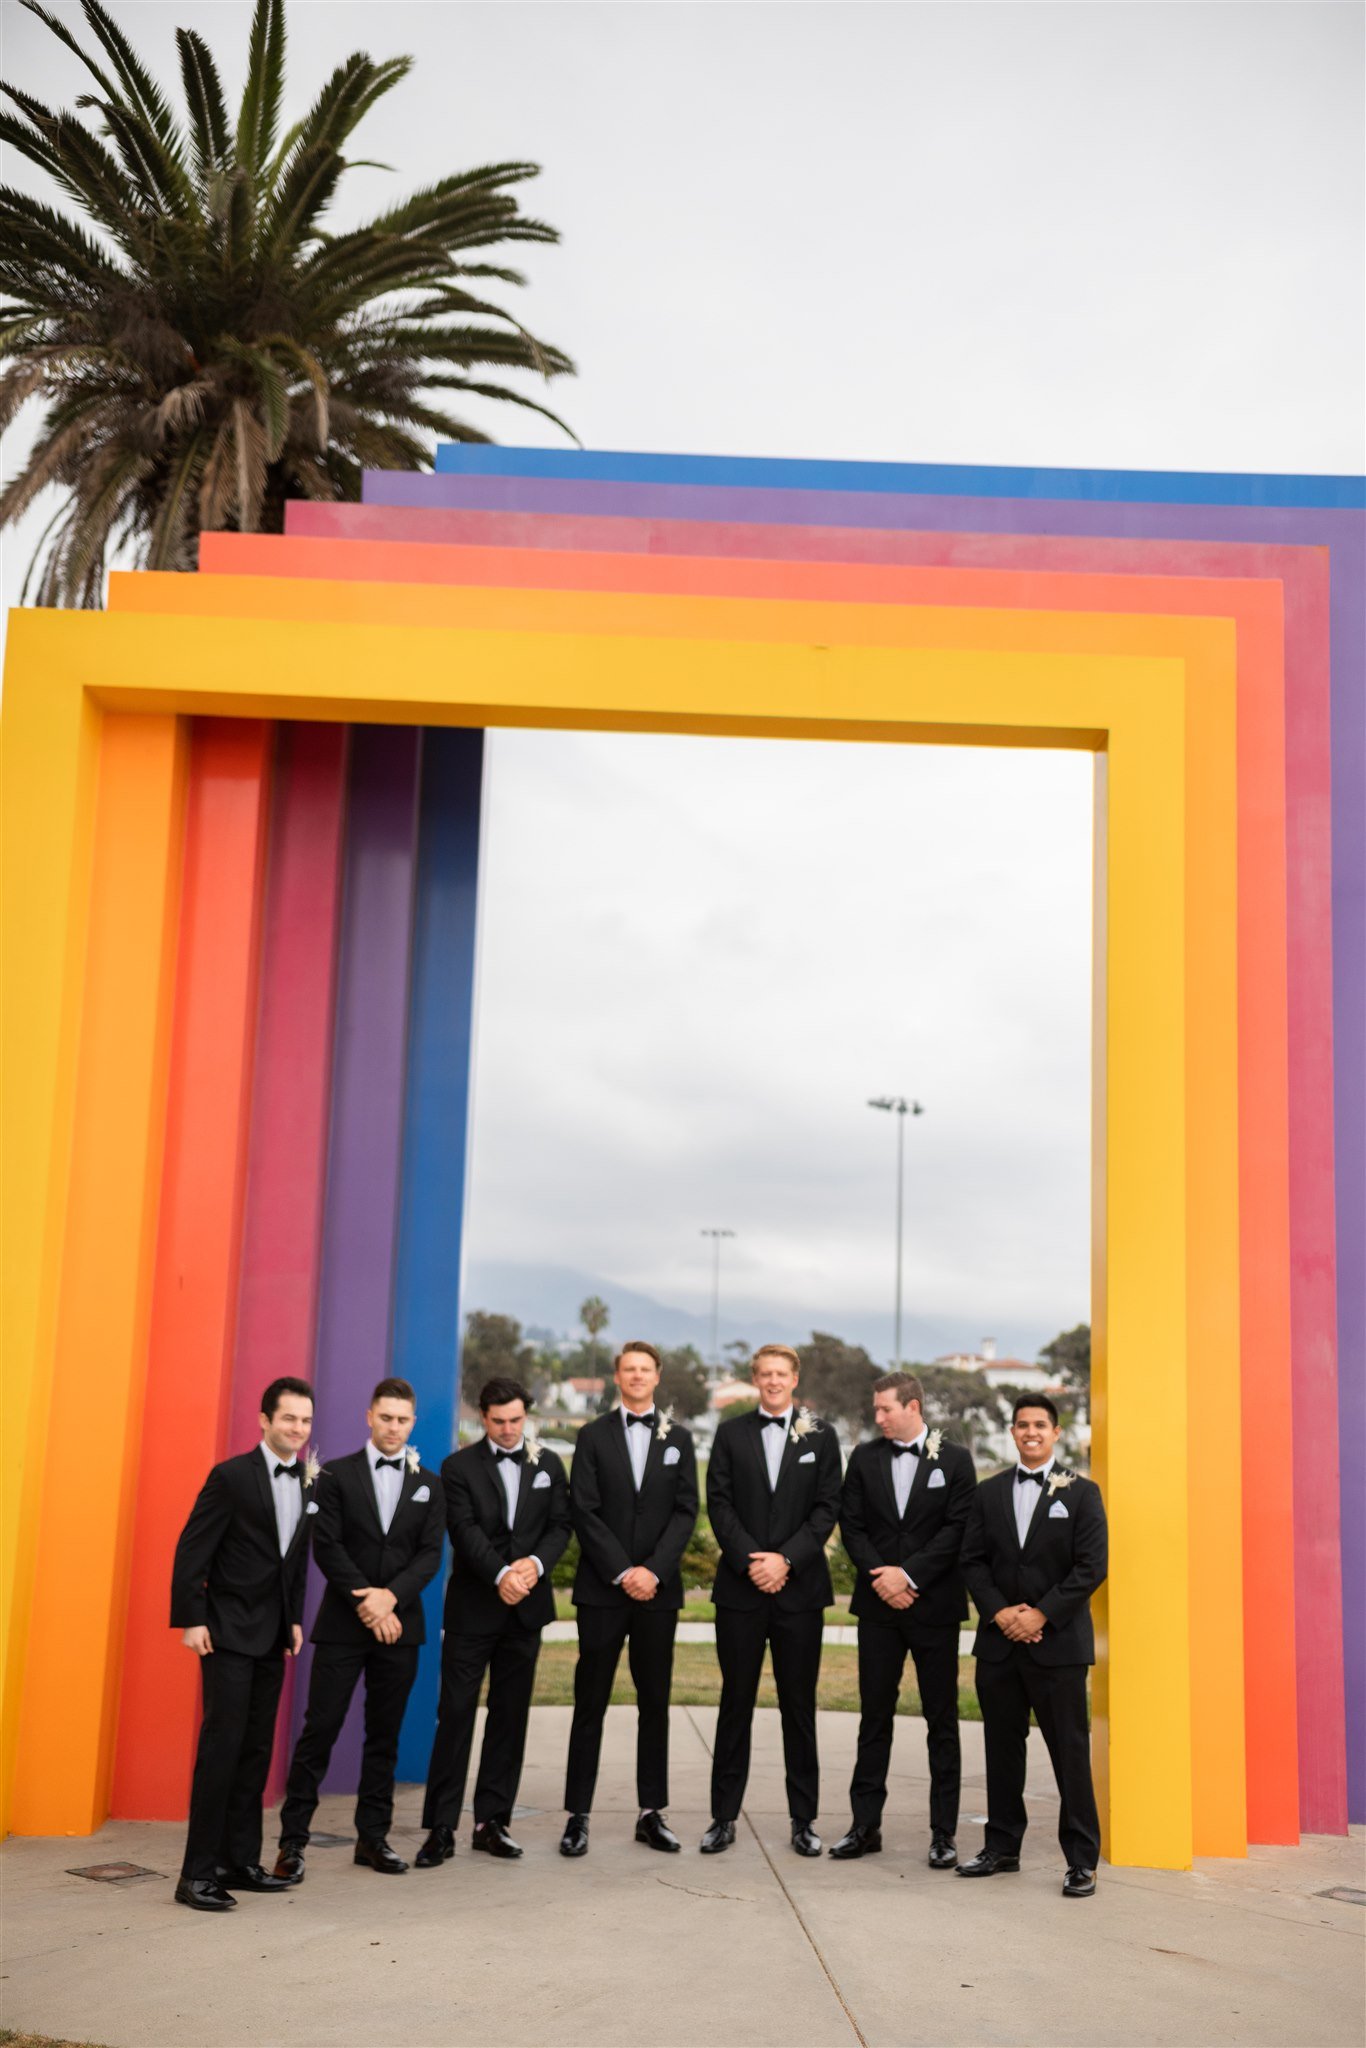 www.santabarbarawedding.com | Events by Fran | Wonder Tribe | Santa Barbara Courthouse | Groom and Groomsmen In Front of Rainbow Arches